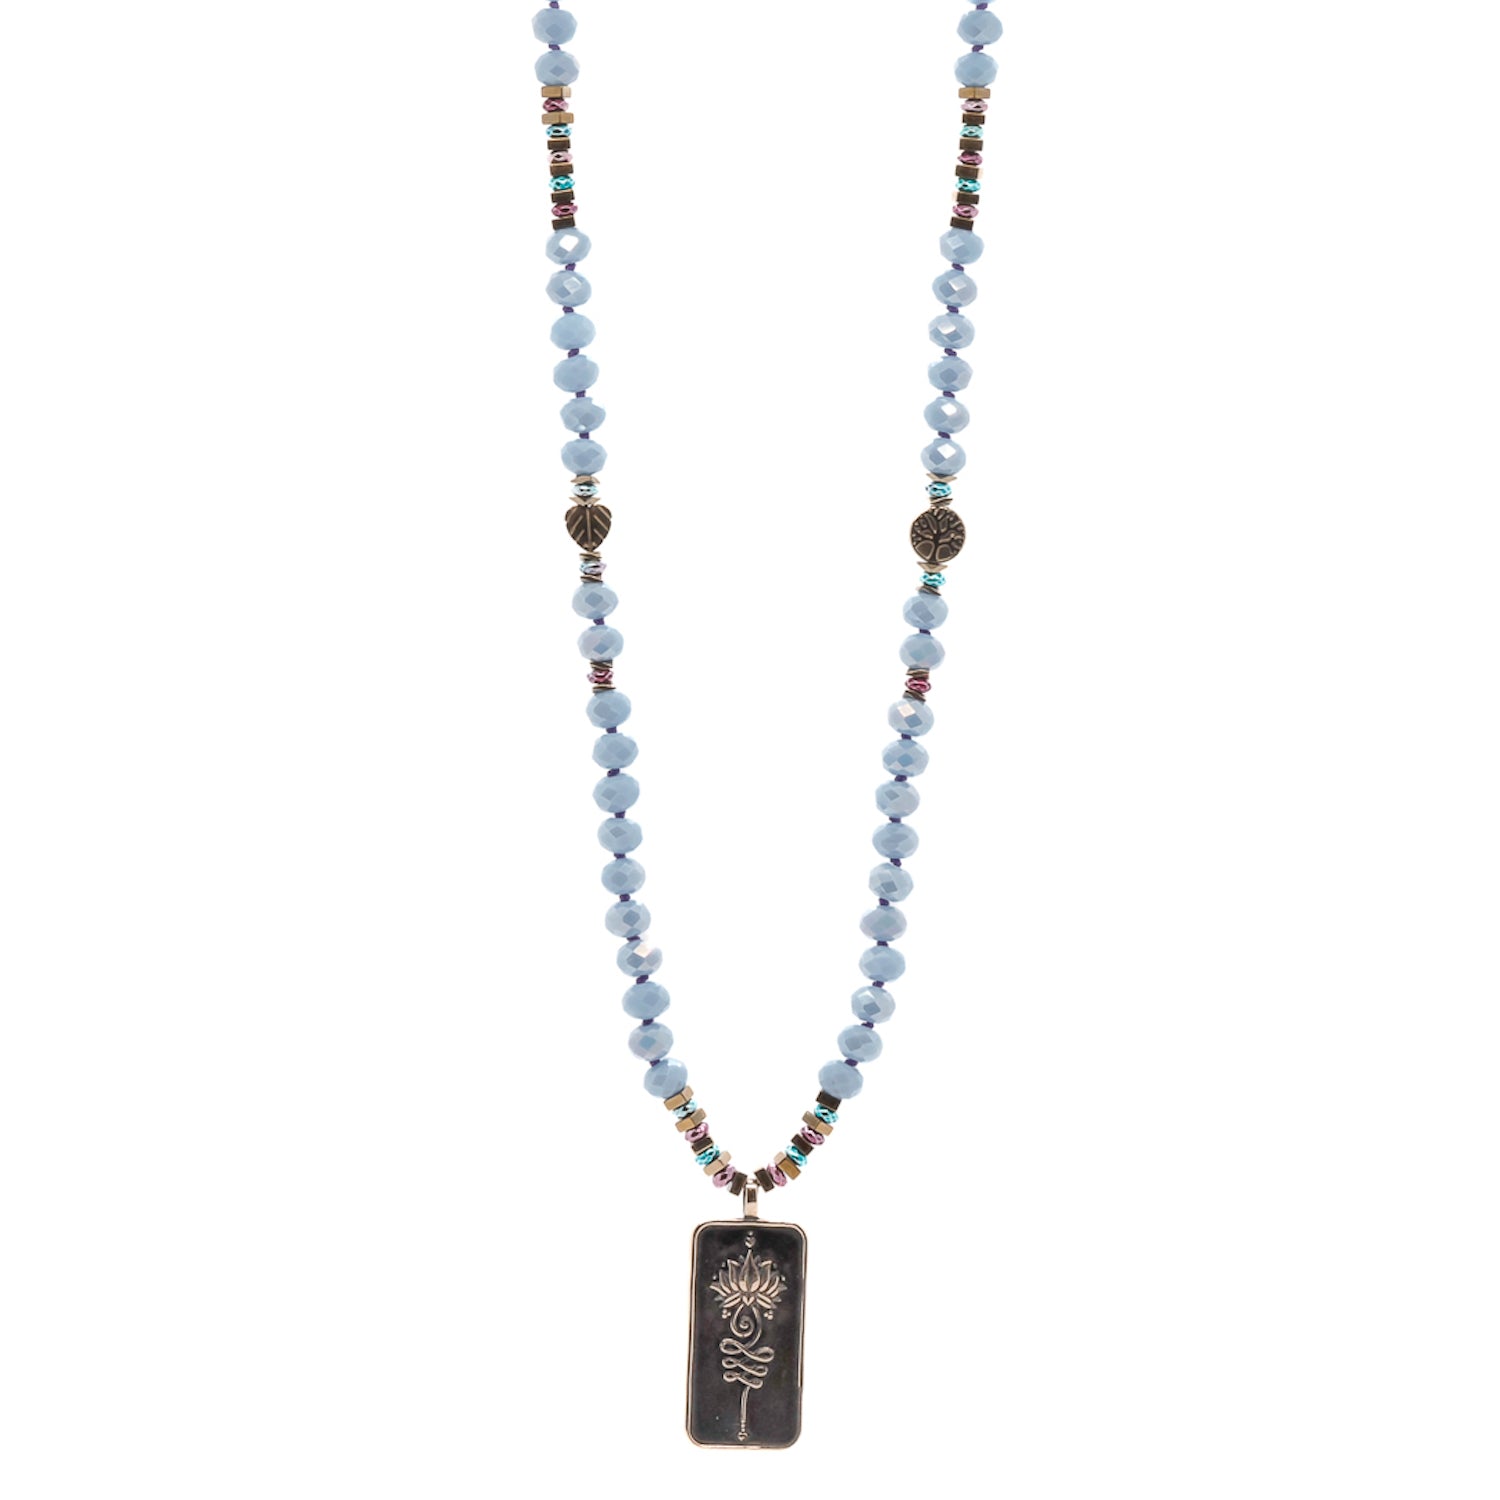 Affirm Self Love - The Unalome Necklace Encourages a Positive and Nurturing Relationship with Yourself.